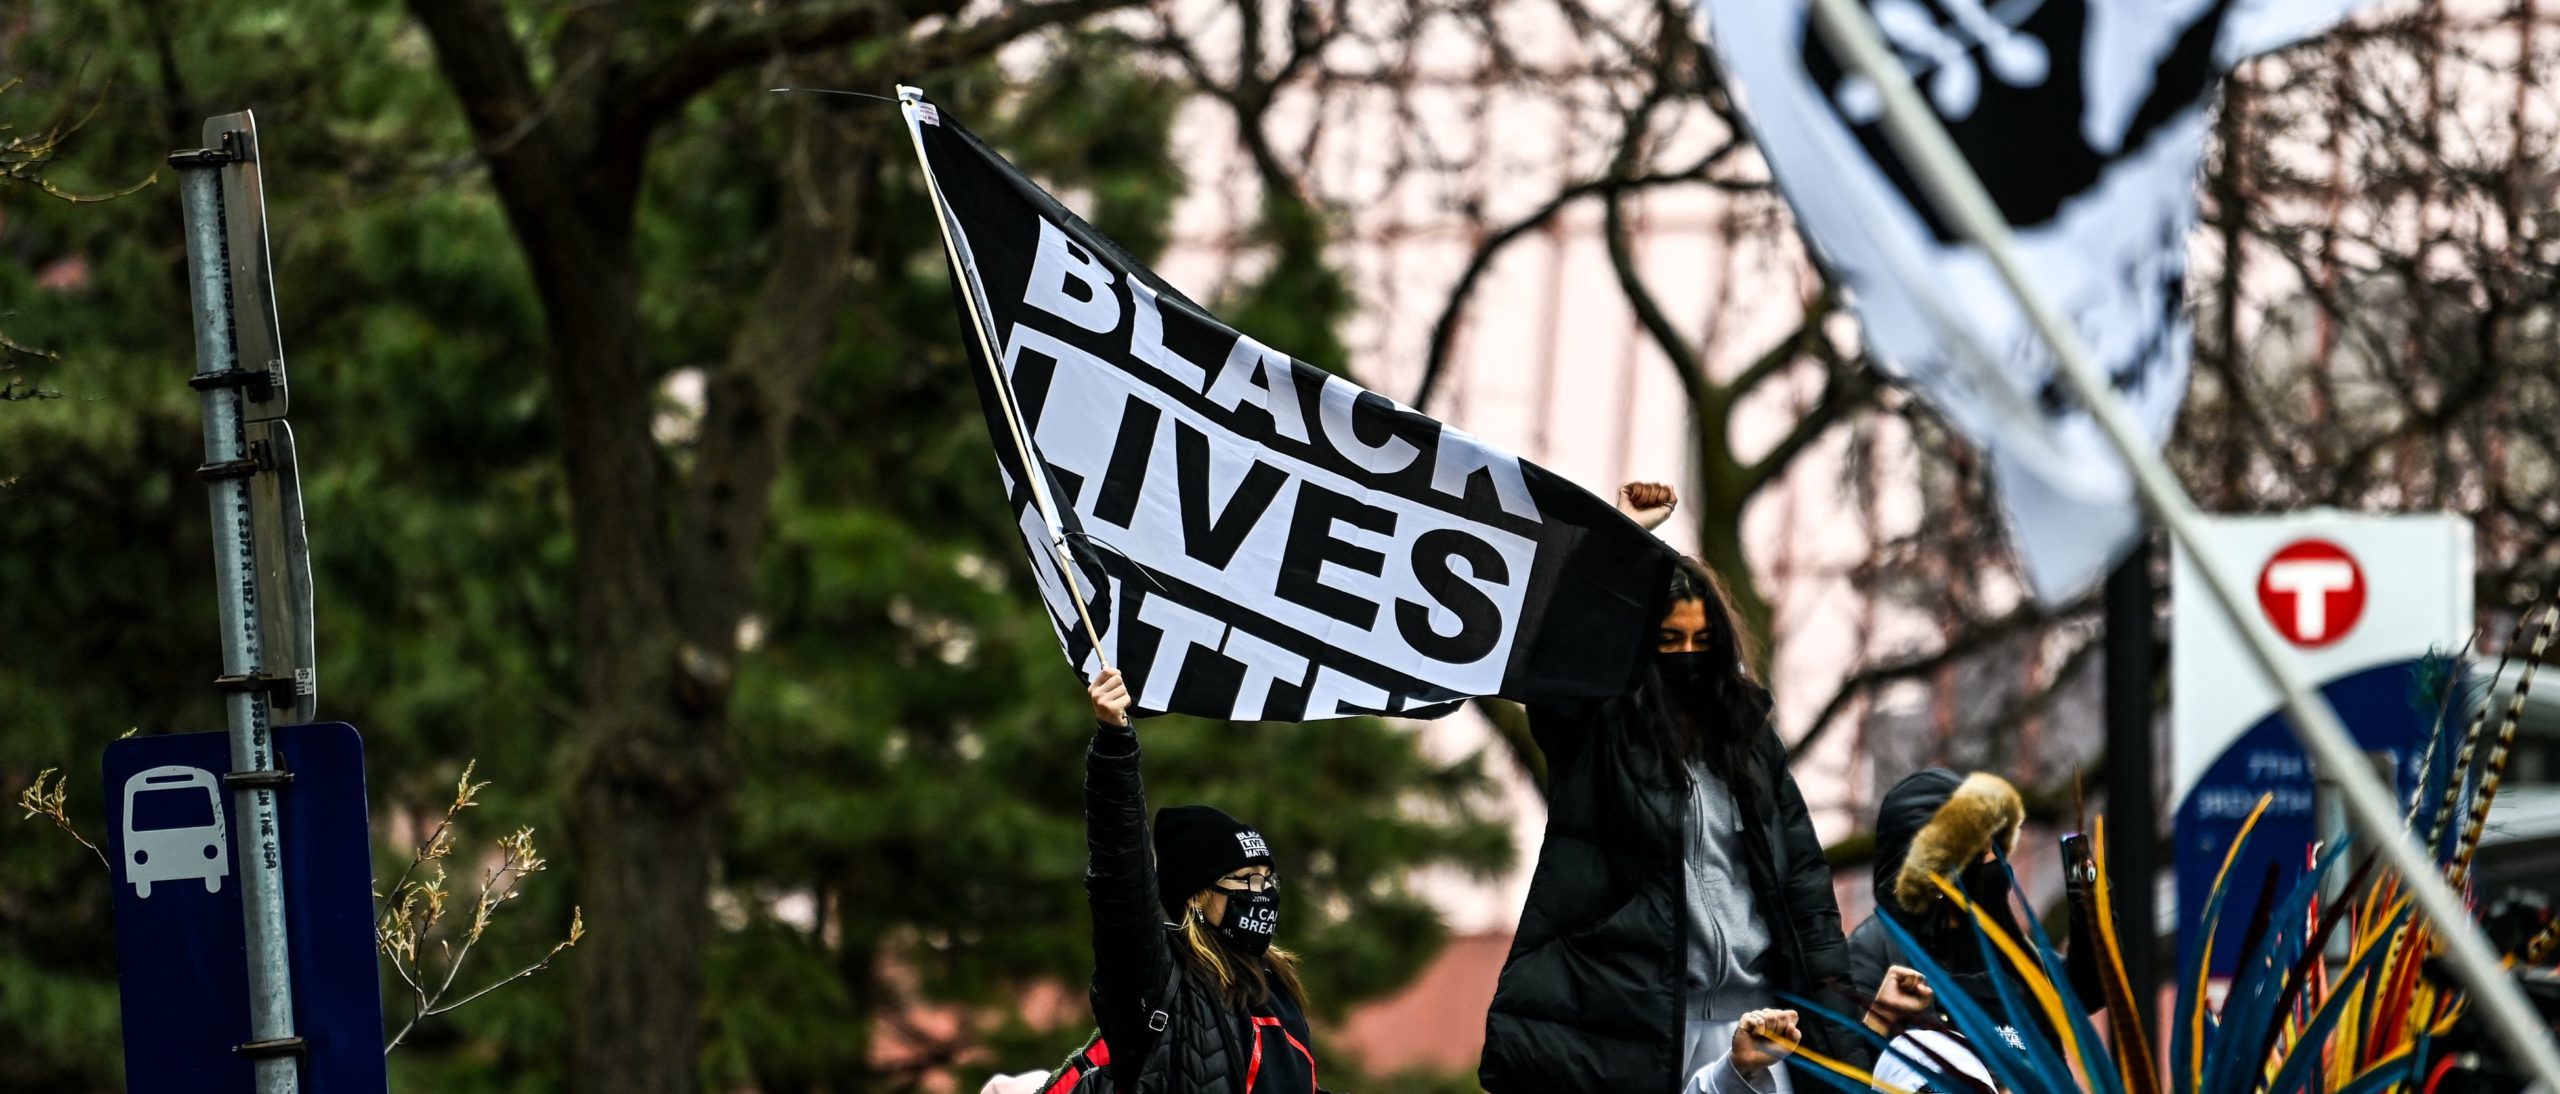 People hold placards as they protest outside of the Courthouse during the trial of former Minneapolis police officer charged with murdering George Floyd in Minneapolis, Minnesota on April 19, 2021. - Jurors on Monday began mulling the fate of the white ex-Minneapolis policeman accused of killing African-American George Floyd, a death that sparked a nationwide reckoning on racism and which prosecutors called a "shocking abuse of authority". (Photo by CHANDAN KHANNA/AFP via Getty Images)